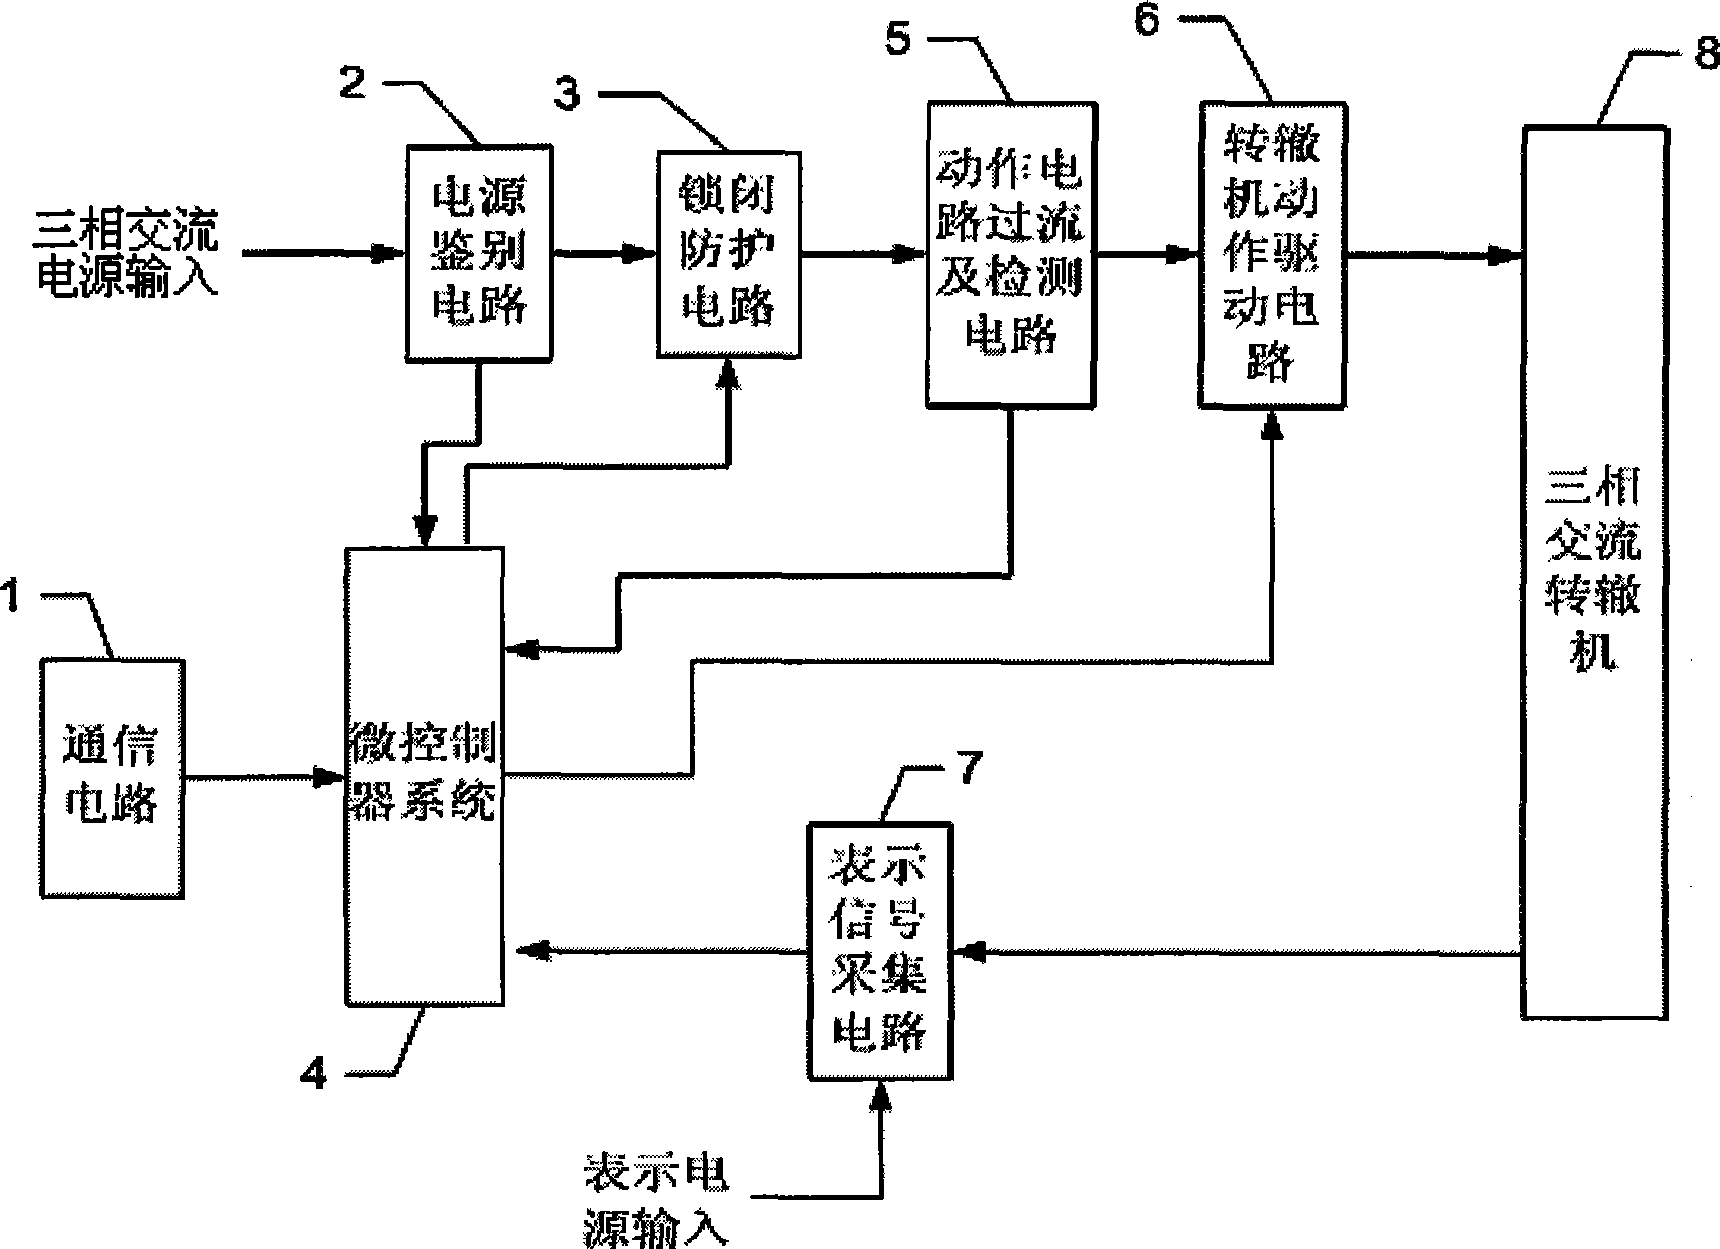 Electronic apparatus and method for controlling three phase current point switch